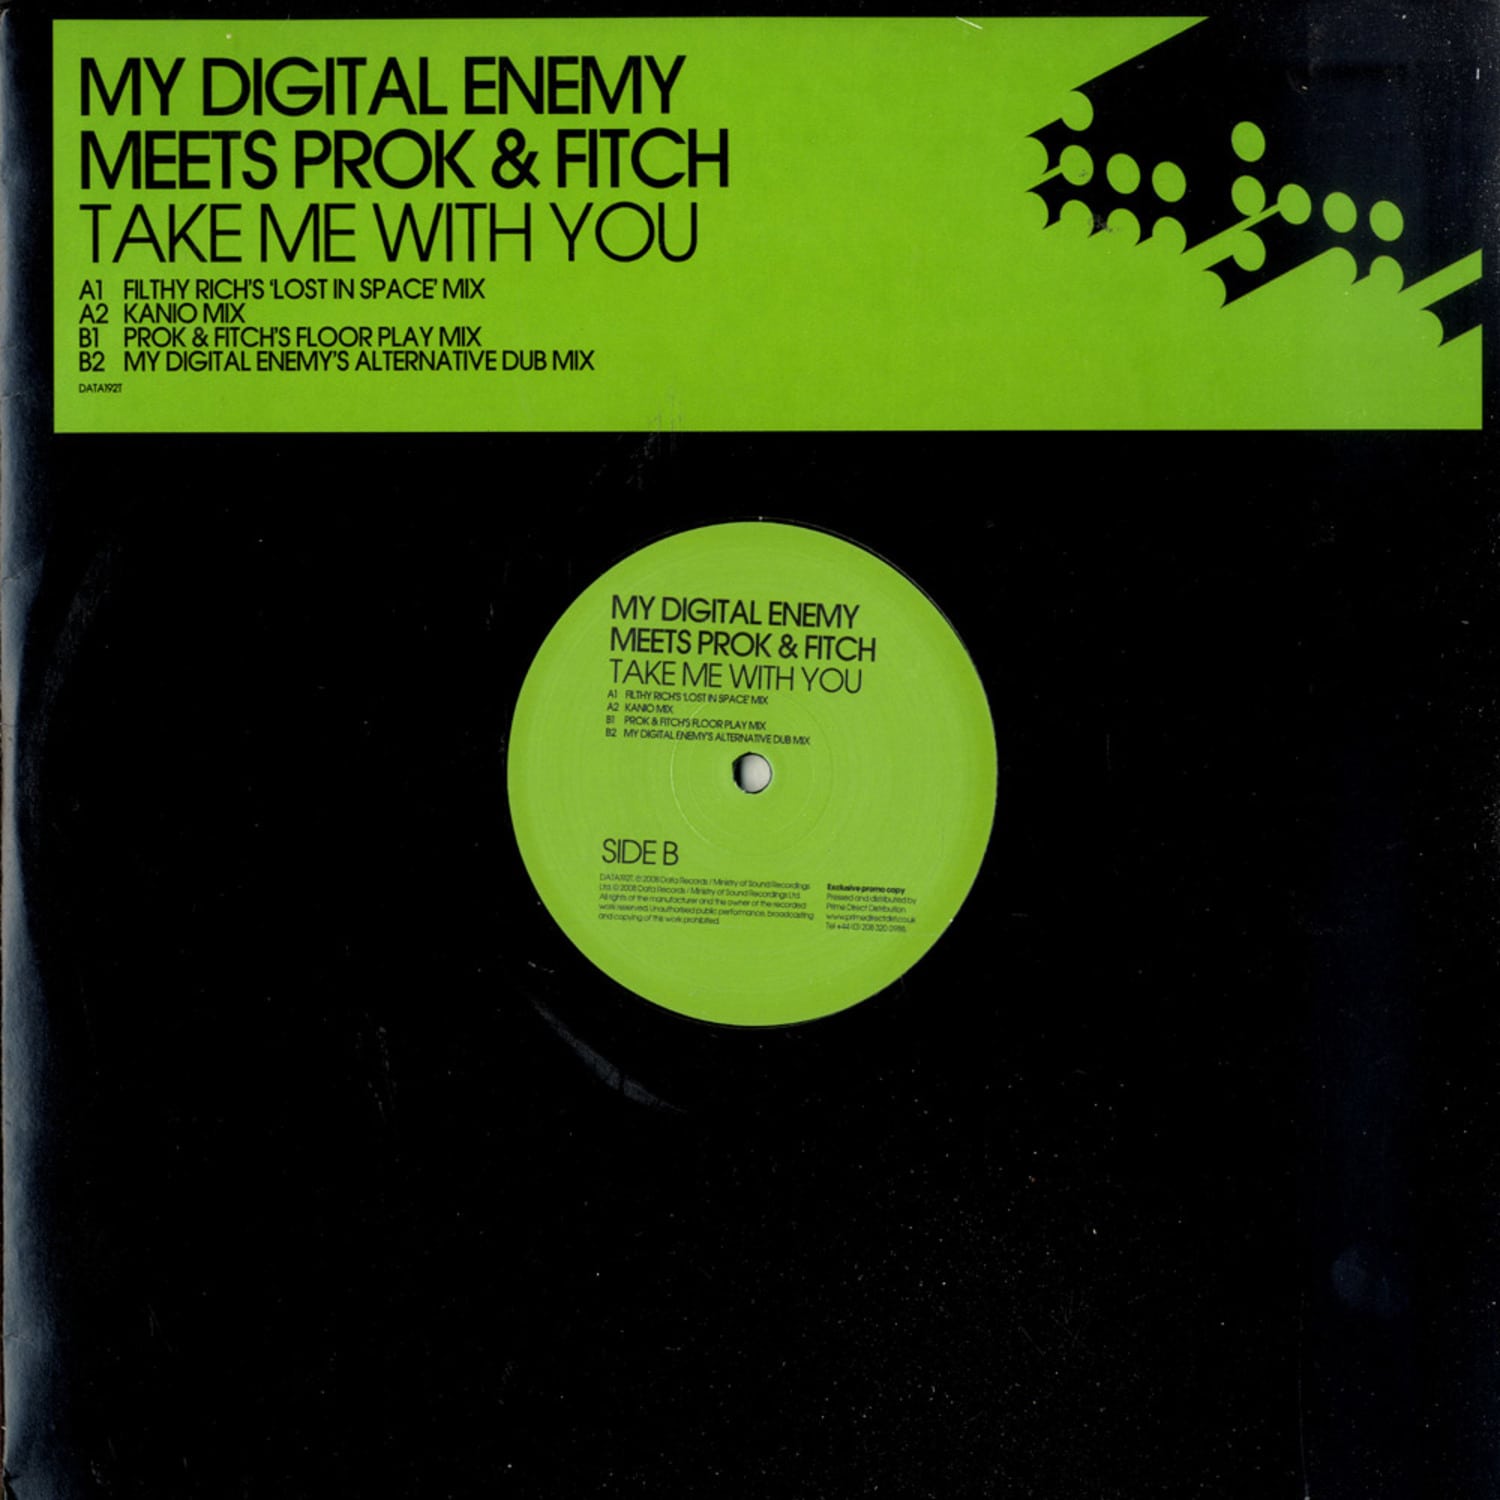 My Digital Enemy meets Prok & Fitch - TAKE ME WITH YOU